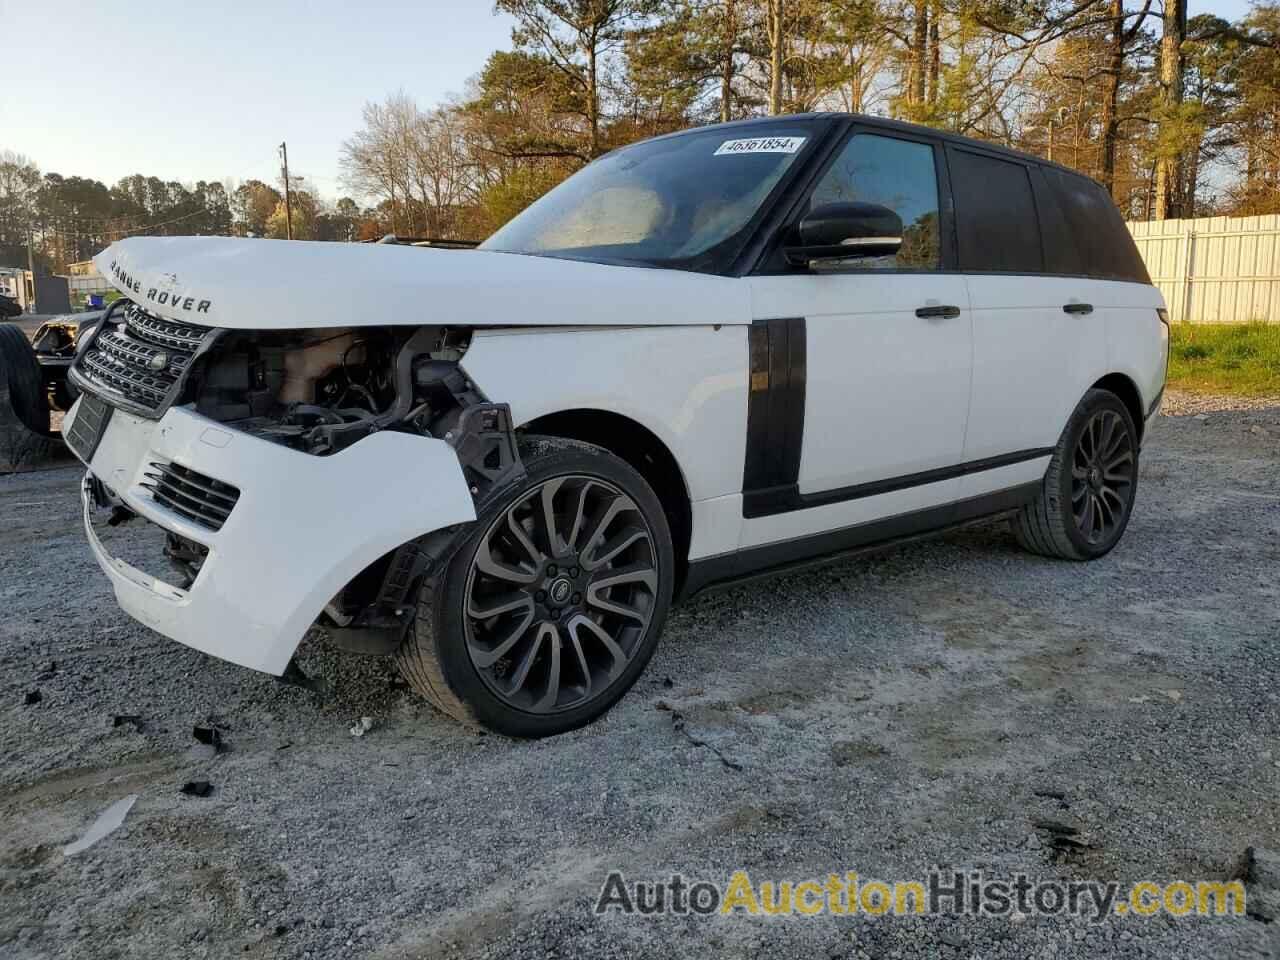 LAND ROVER RANGEROVER SUPERCHARGED, SALGS2TF8FA220423